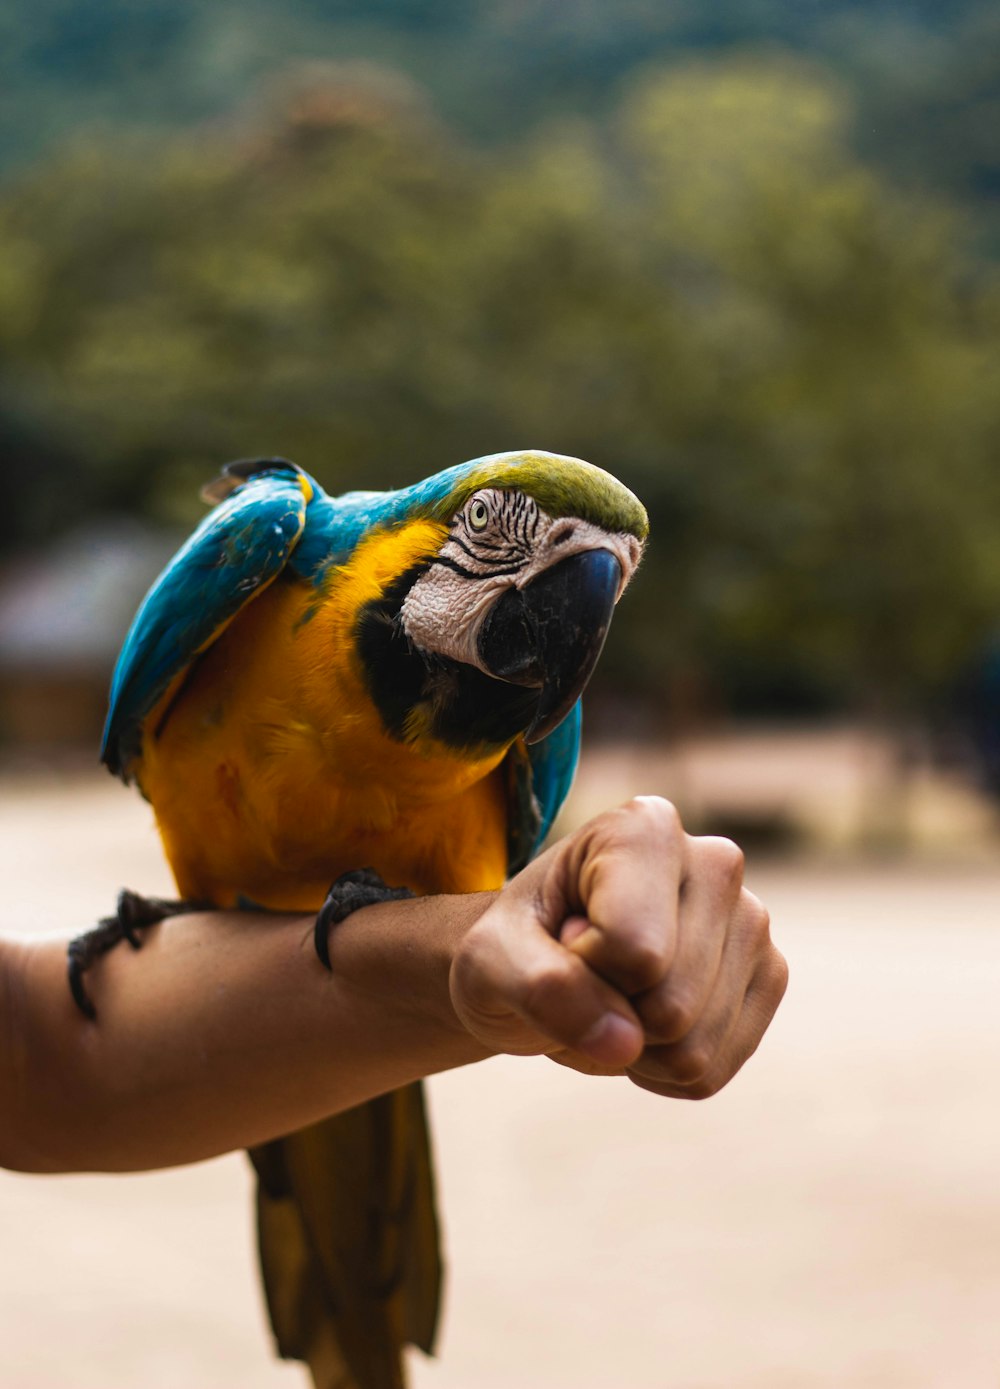 orange, blue, and green macaw bird perched on person's hand